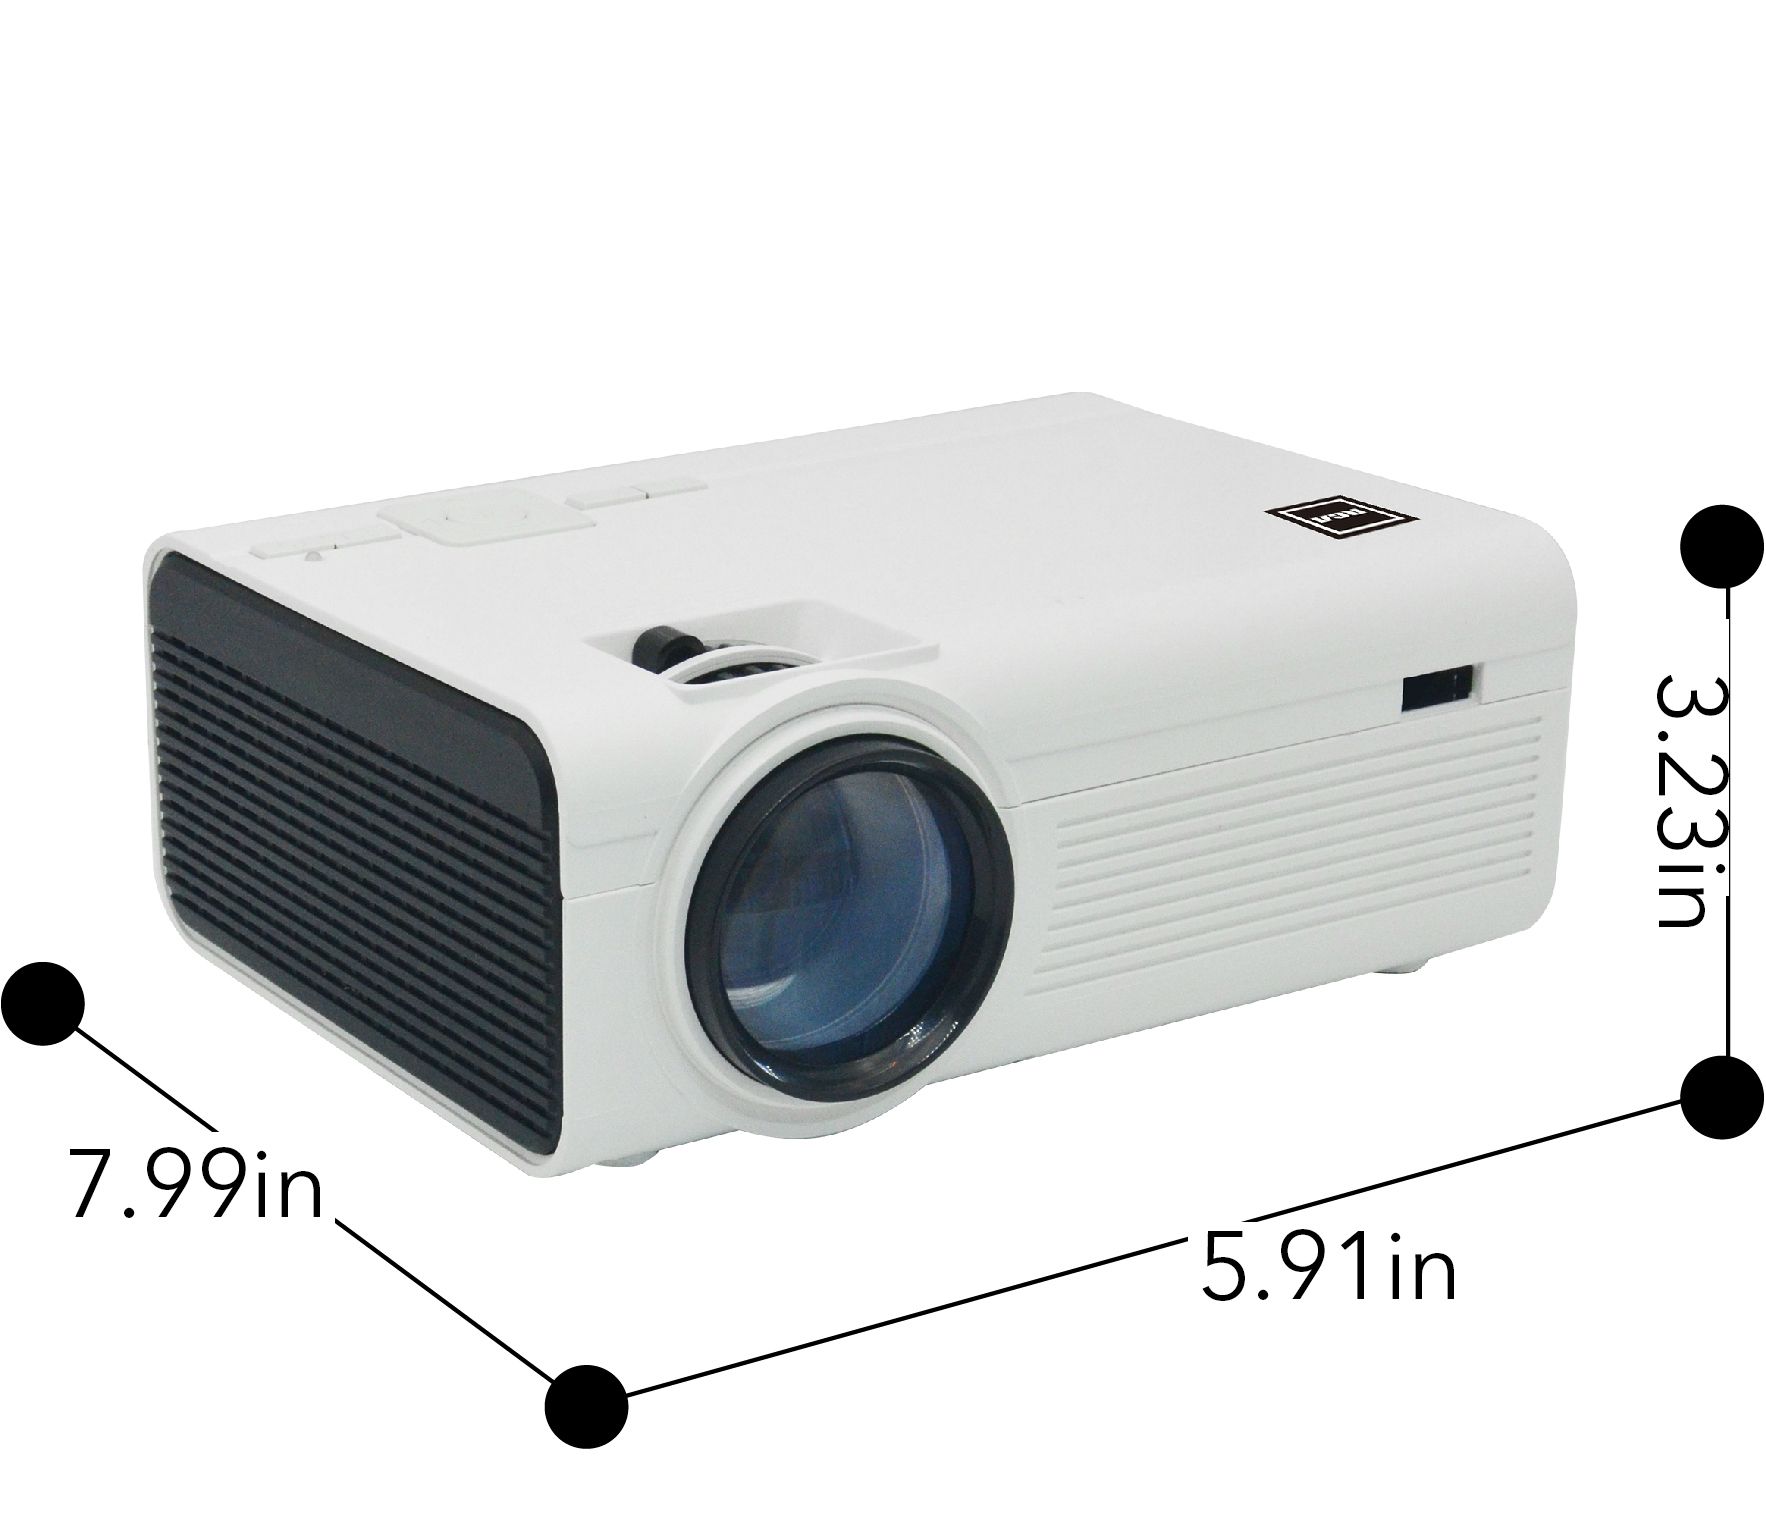 RCA 480P LCD Home Theater Projector - Up to 130" RPJ136, 1.5 LB, White - image 4 of 16